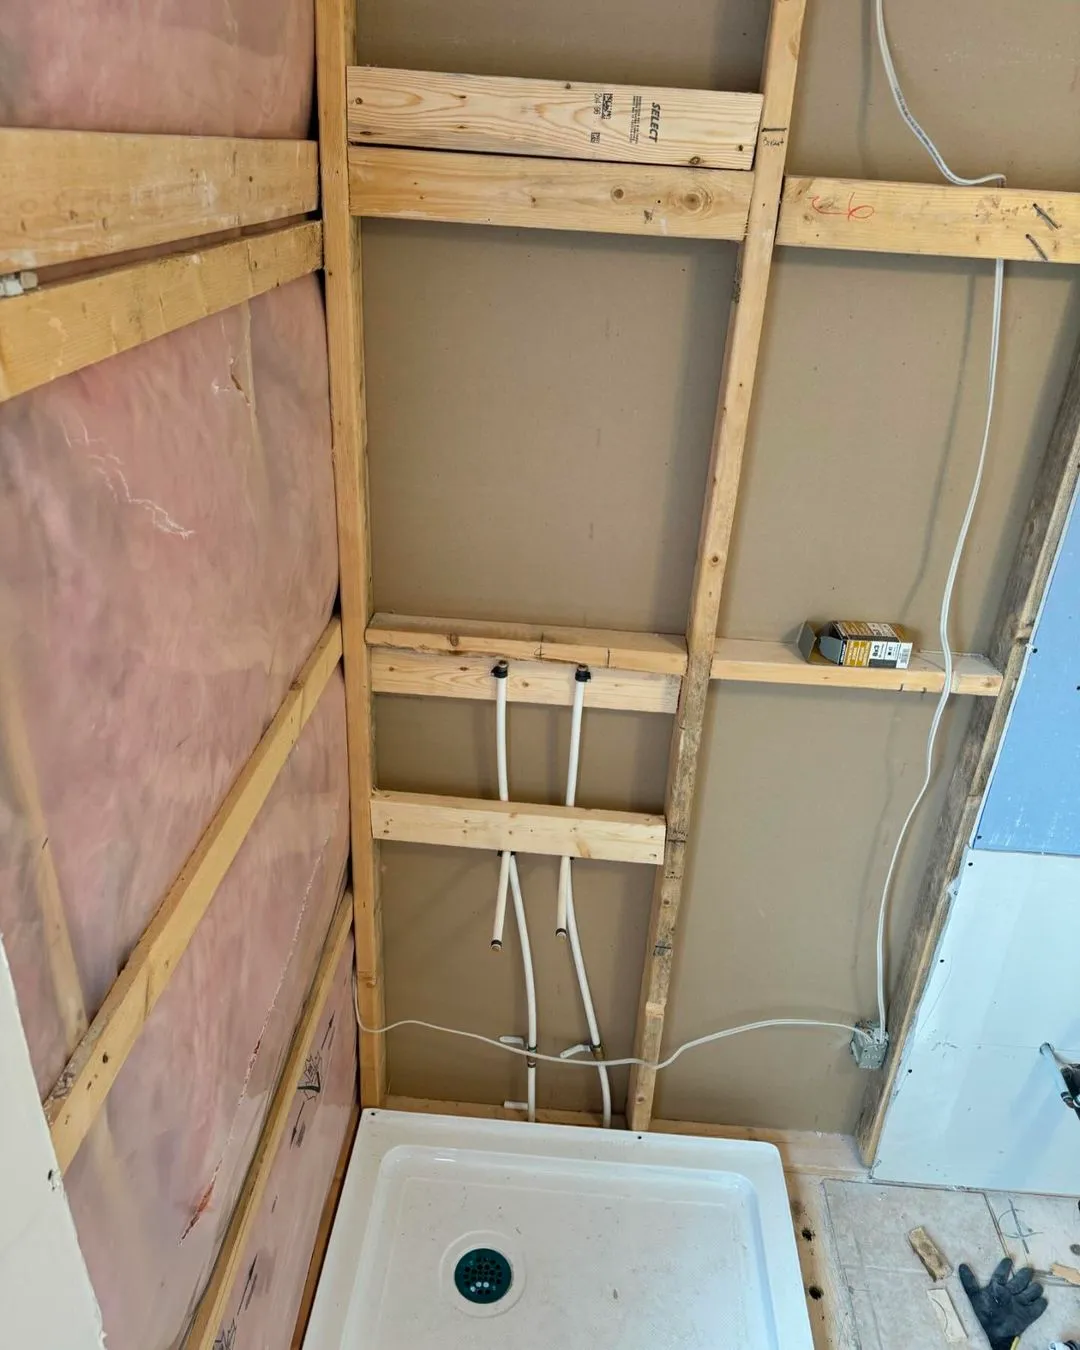 Plumbing Repair and Installation for Plomberie Drainville in Montreal, Quebec